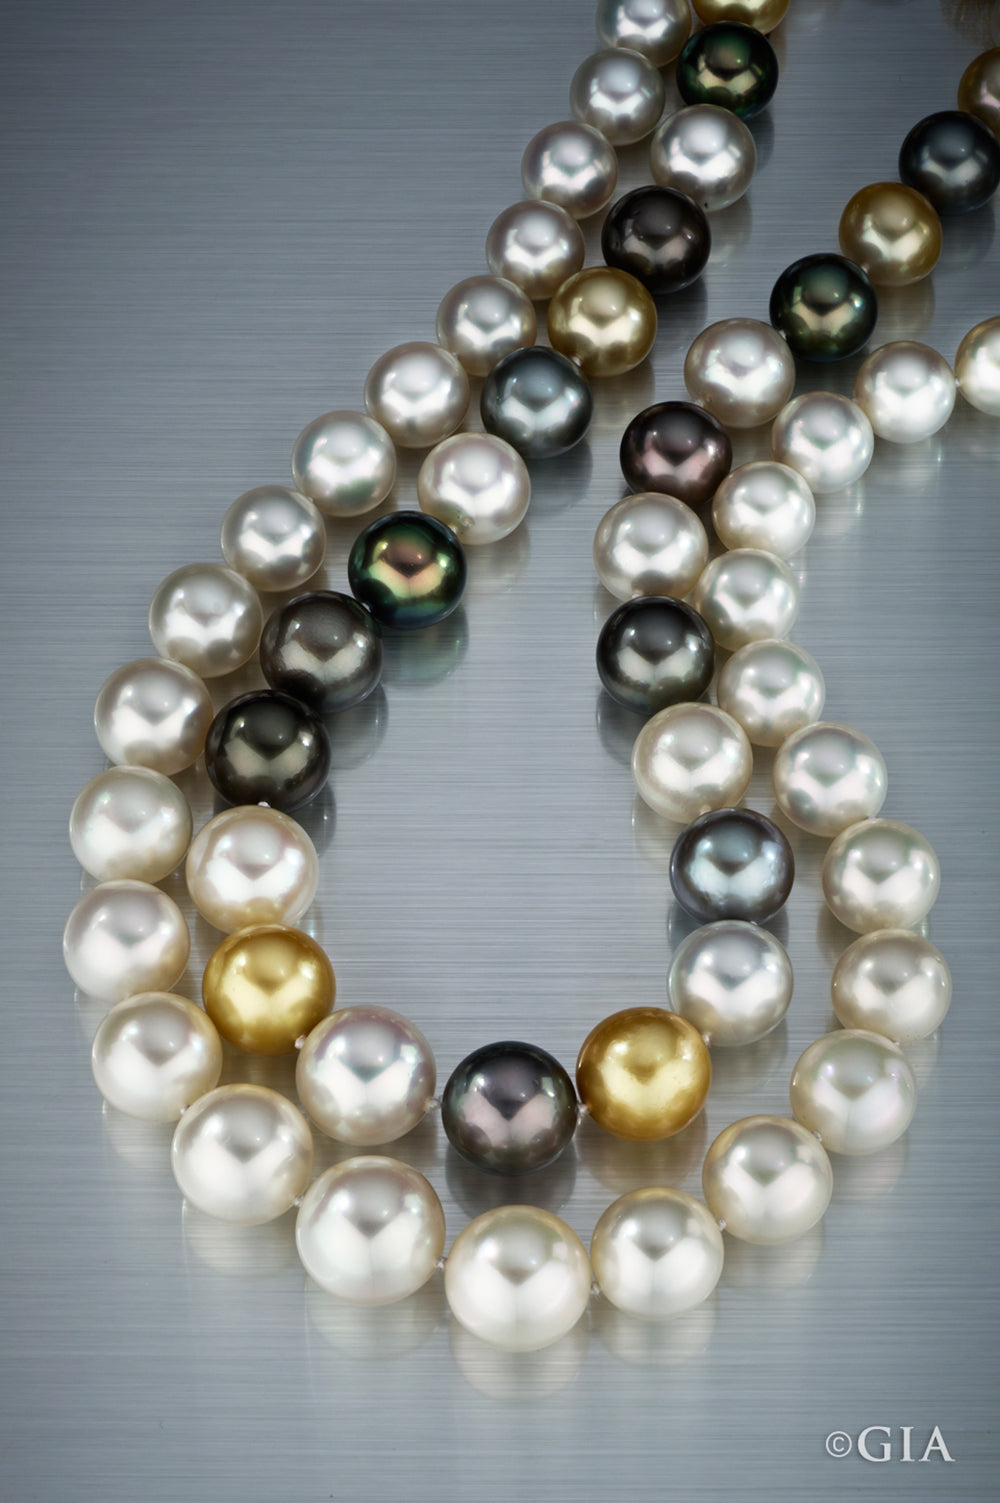 Tahitian and South Sea Pearl Necklaces